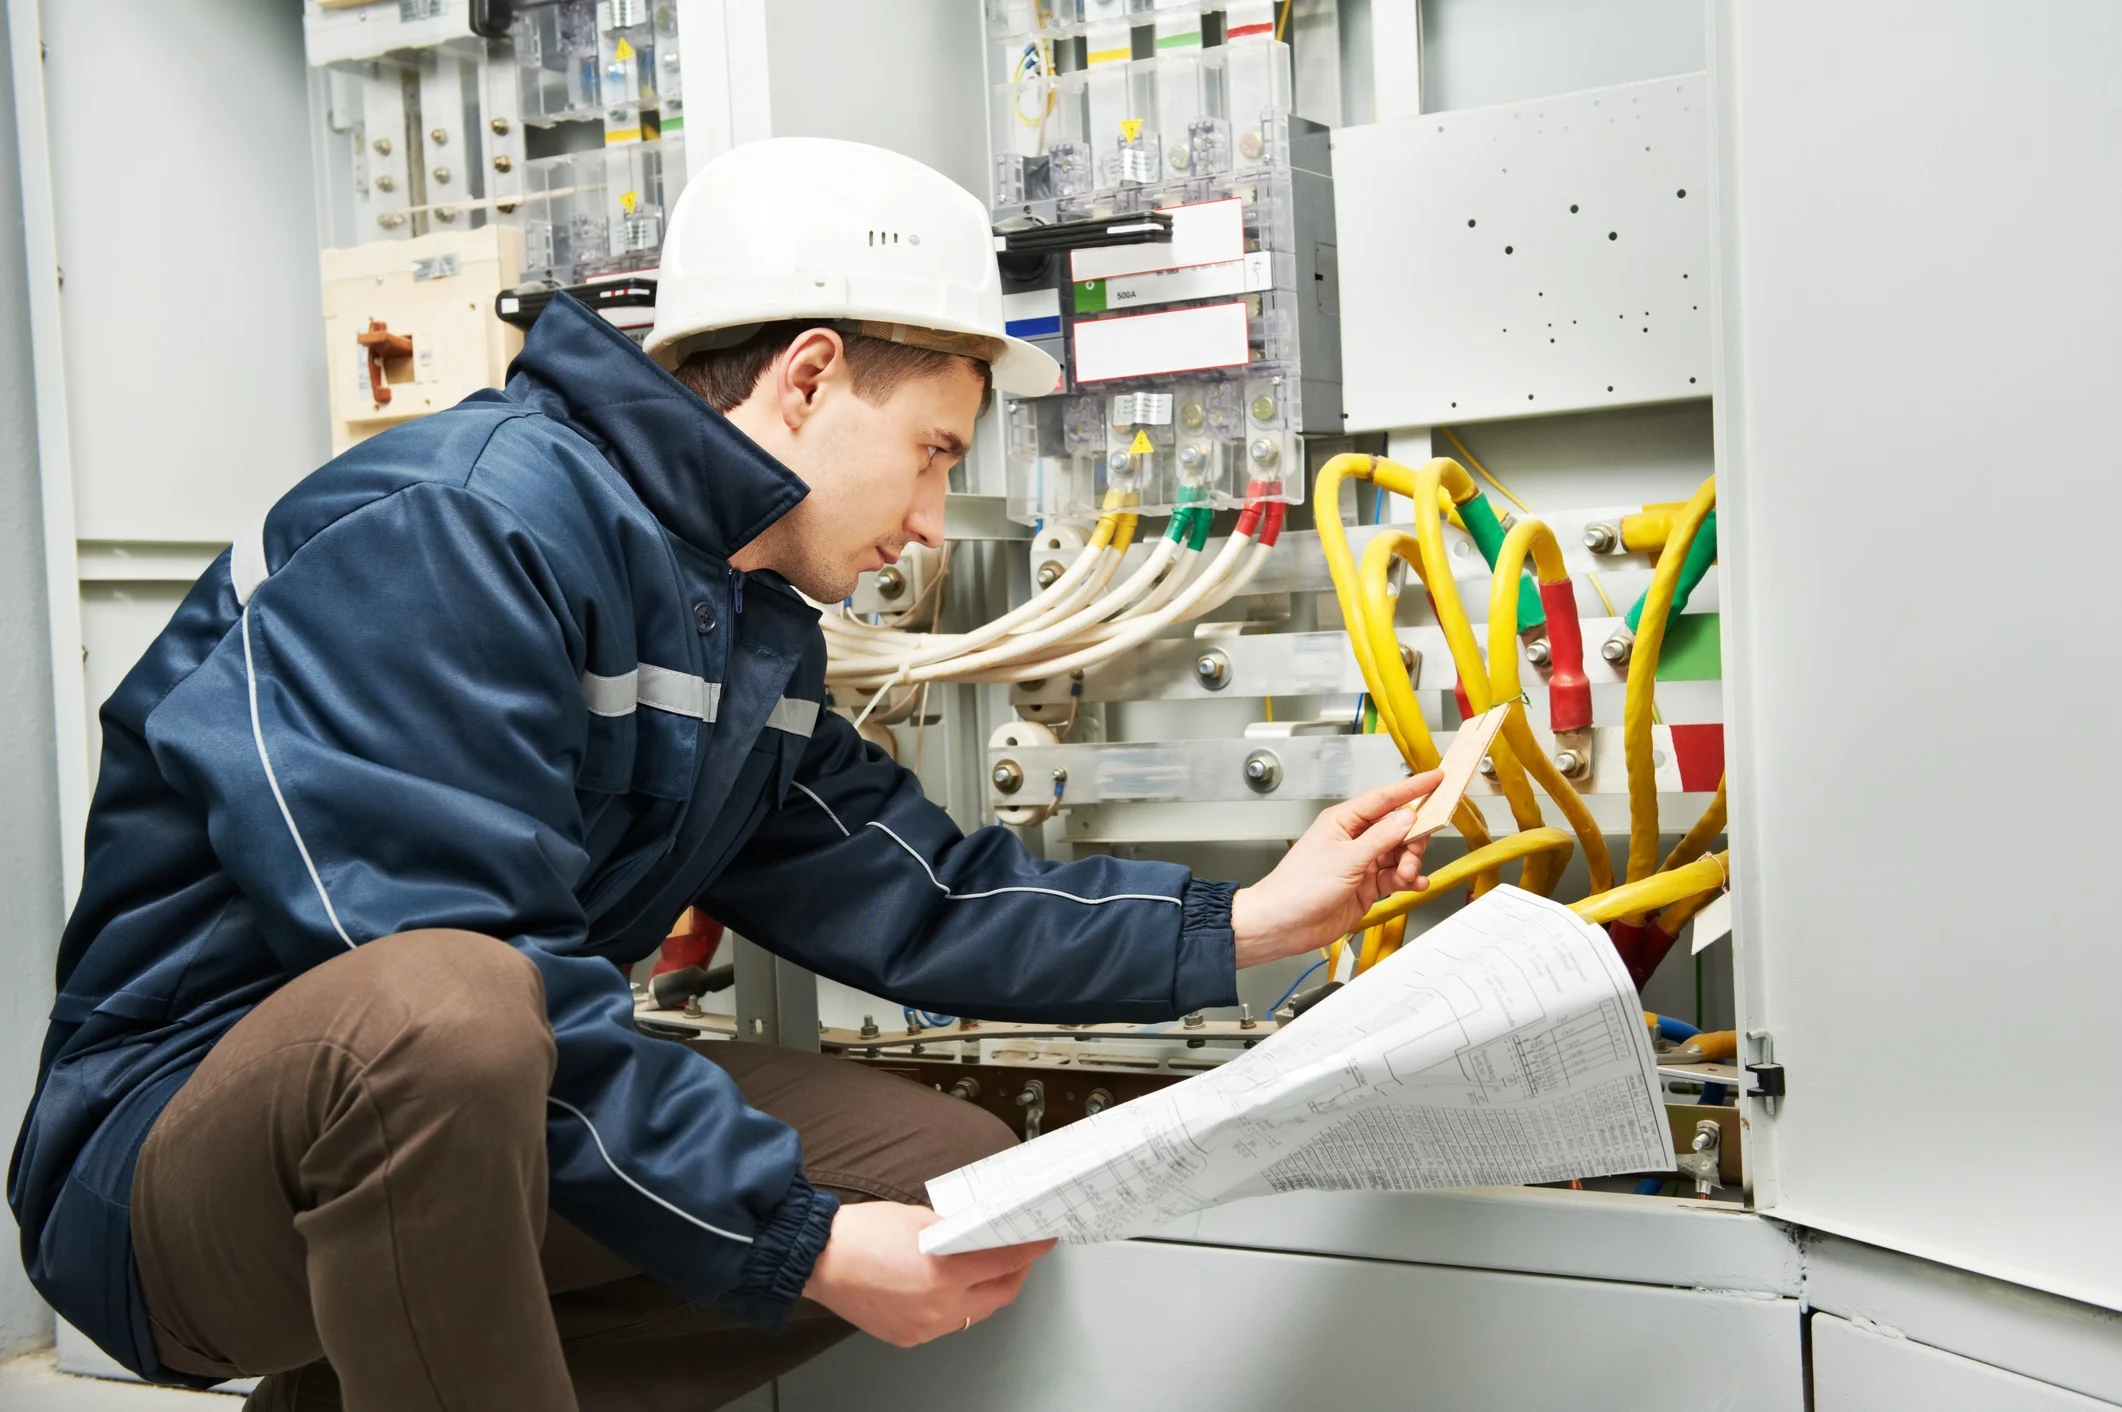 How to Maintain a Safe Electrical System in Commercial Buildings?